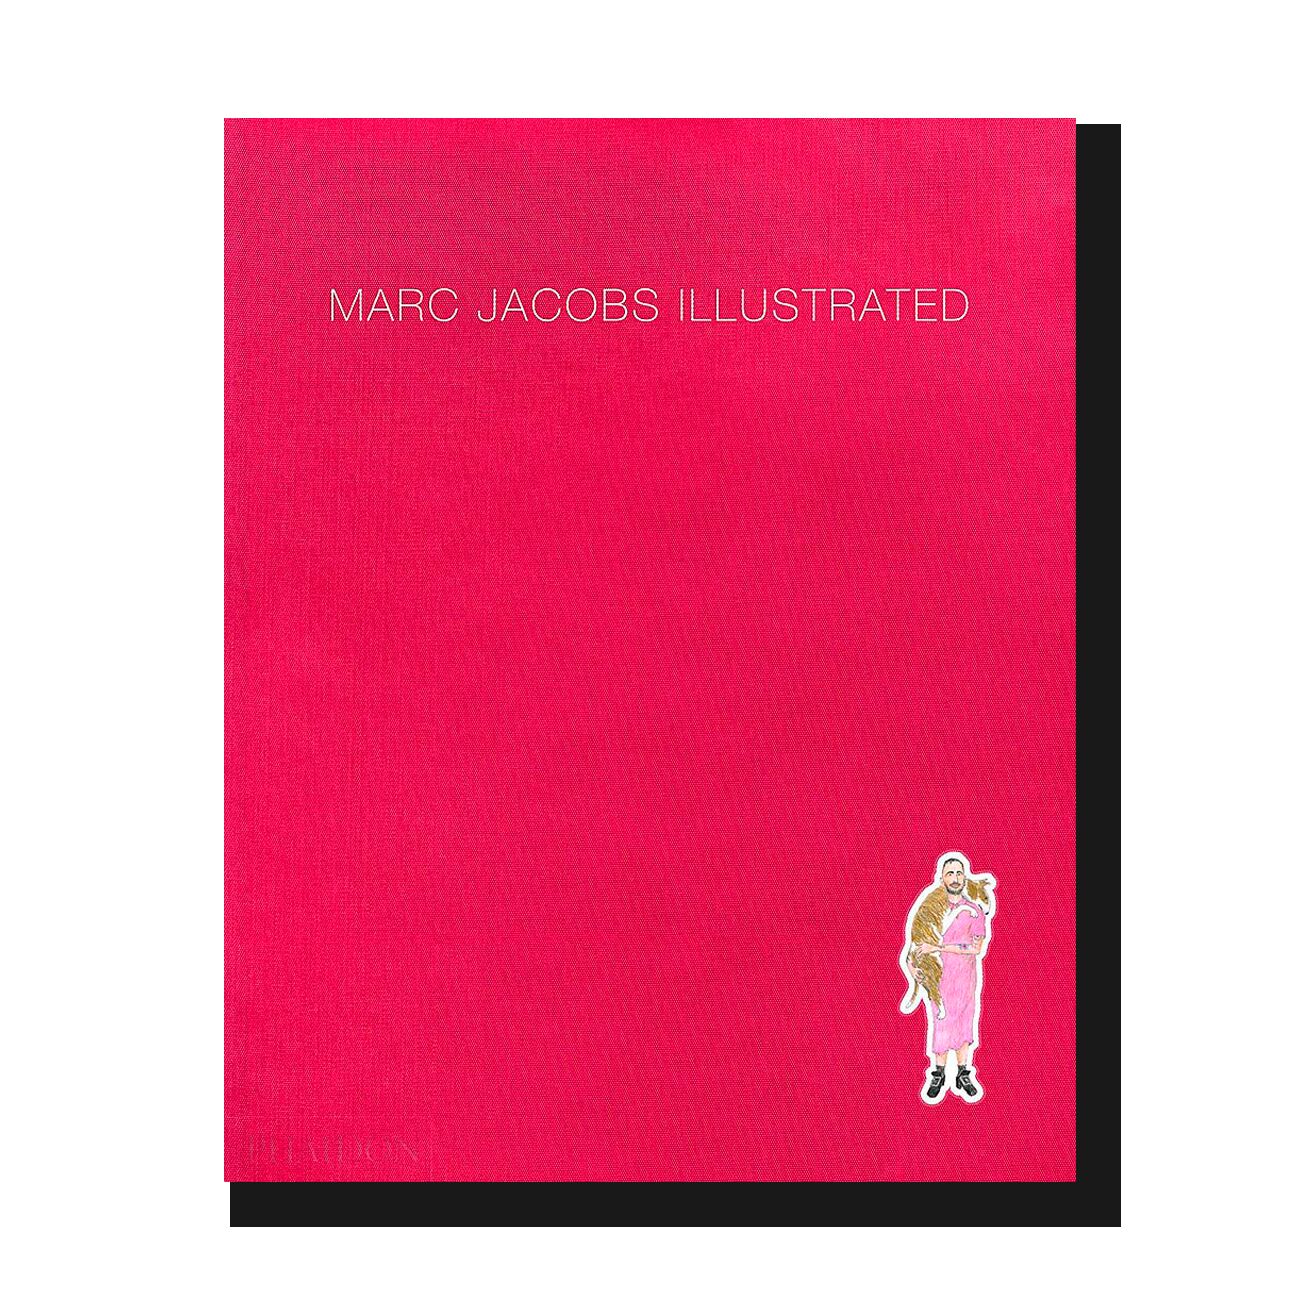 Marc Jacobs Illustrated